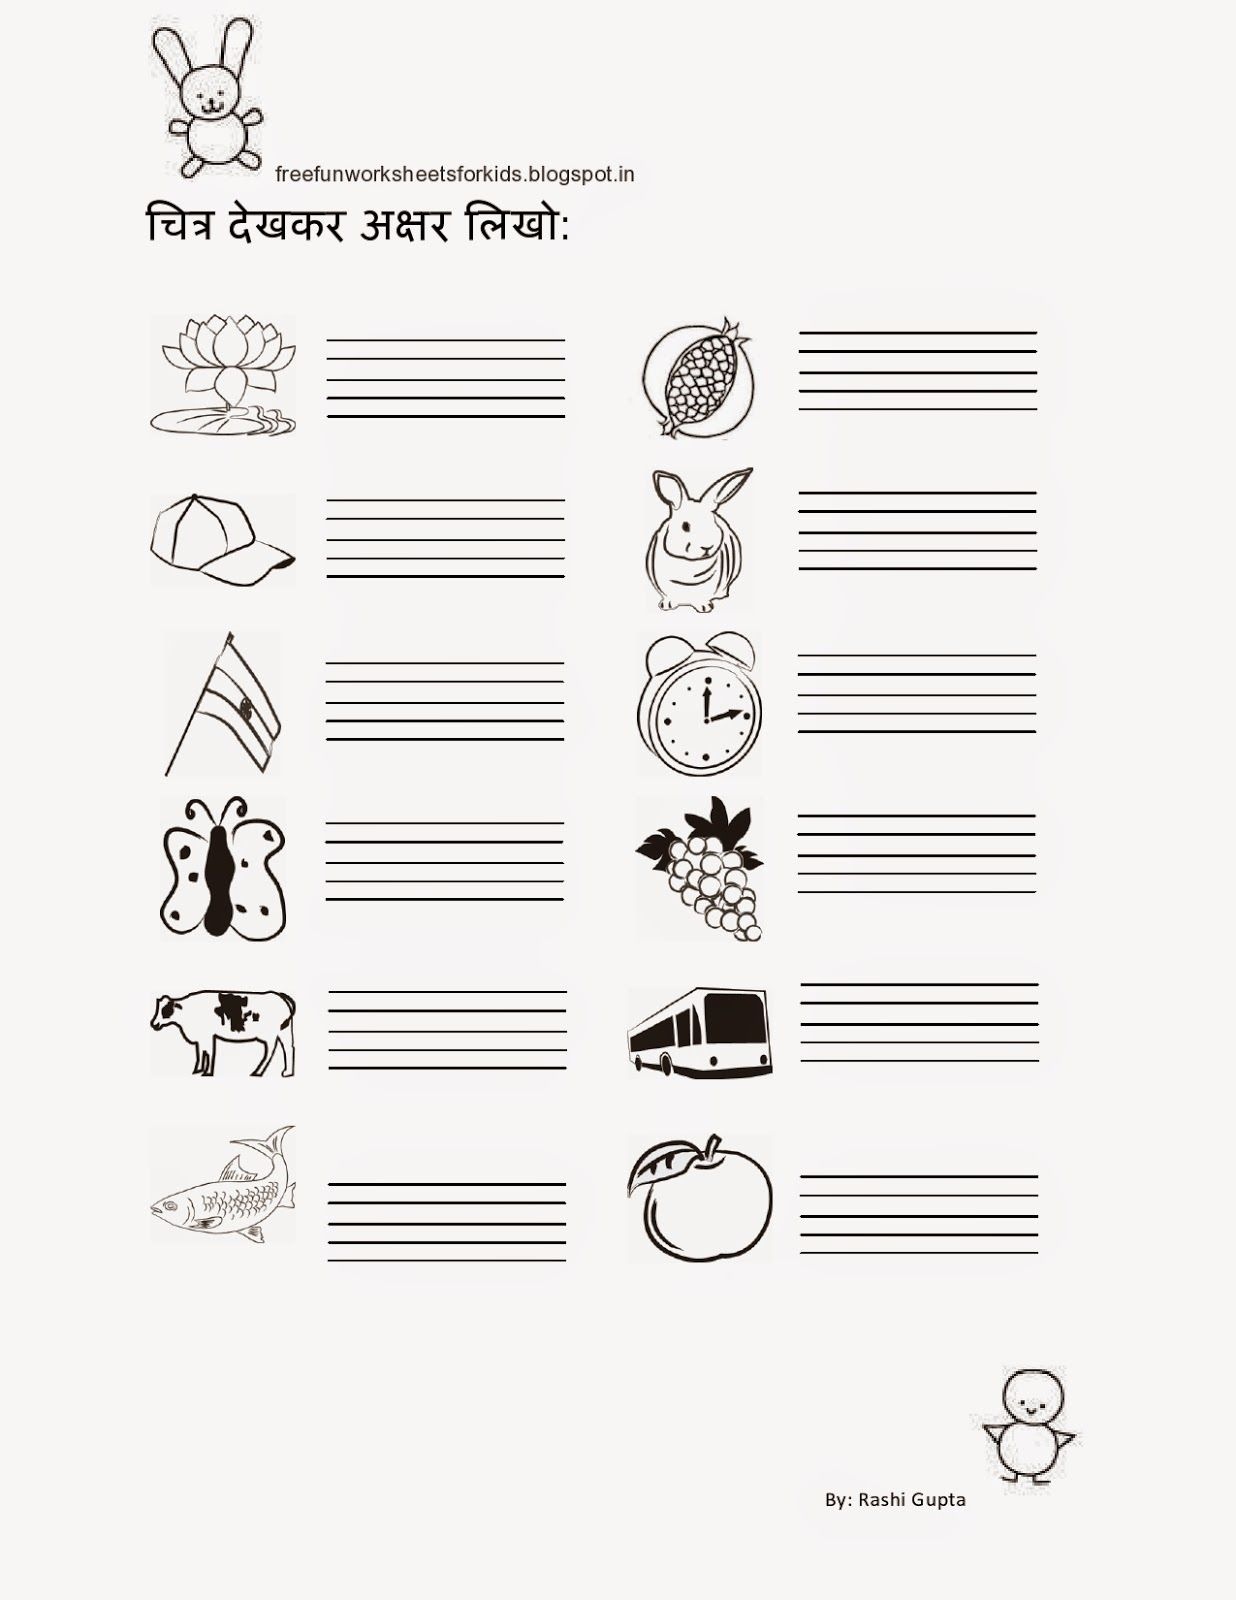 Free Fun Worksheets For Kids: Free Printable Fun Hindi Worksheets - Free Printable Hindi Comprehension Worksheets For Grade 3